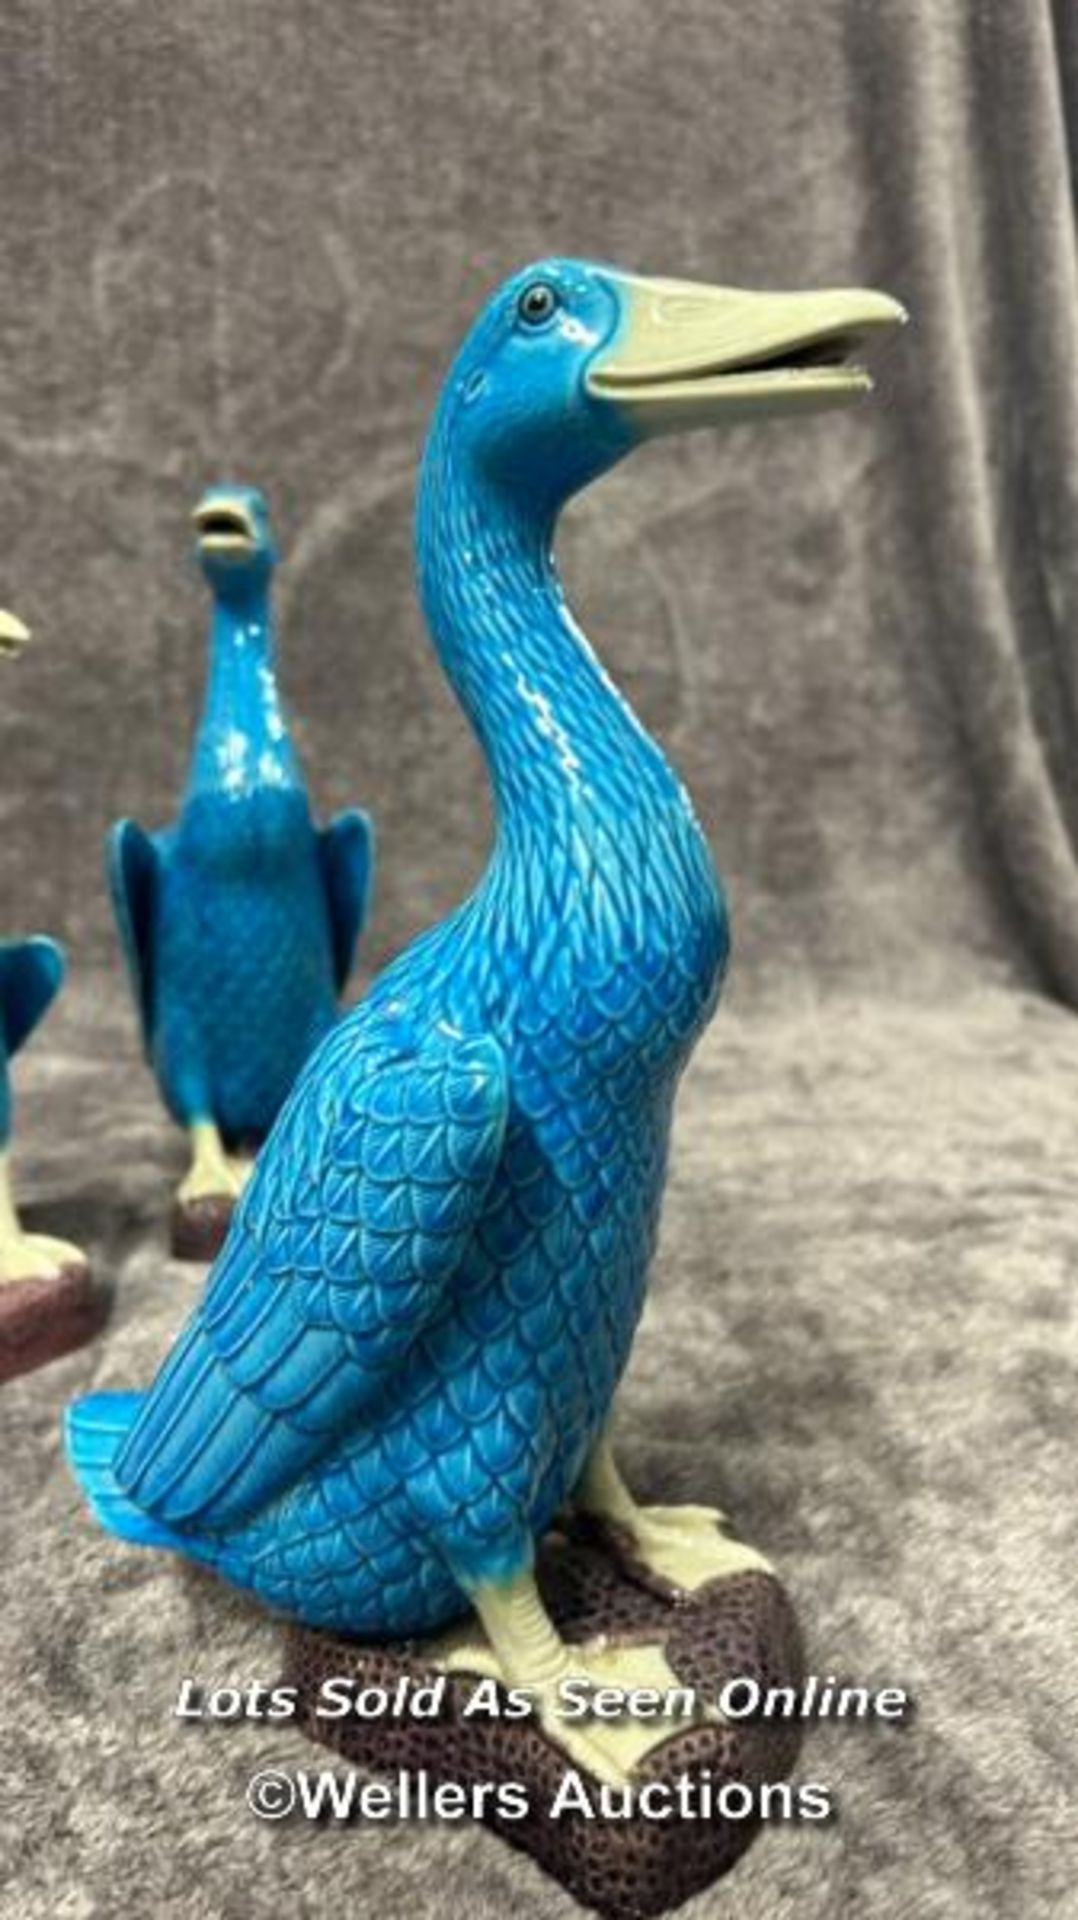 Set of six Chinese turquoise glazed porcelain duck figures, the tallest 29cm high / AN6 - Image 5 of 17